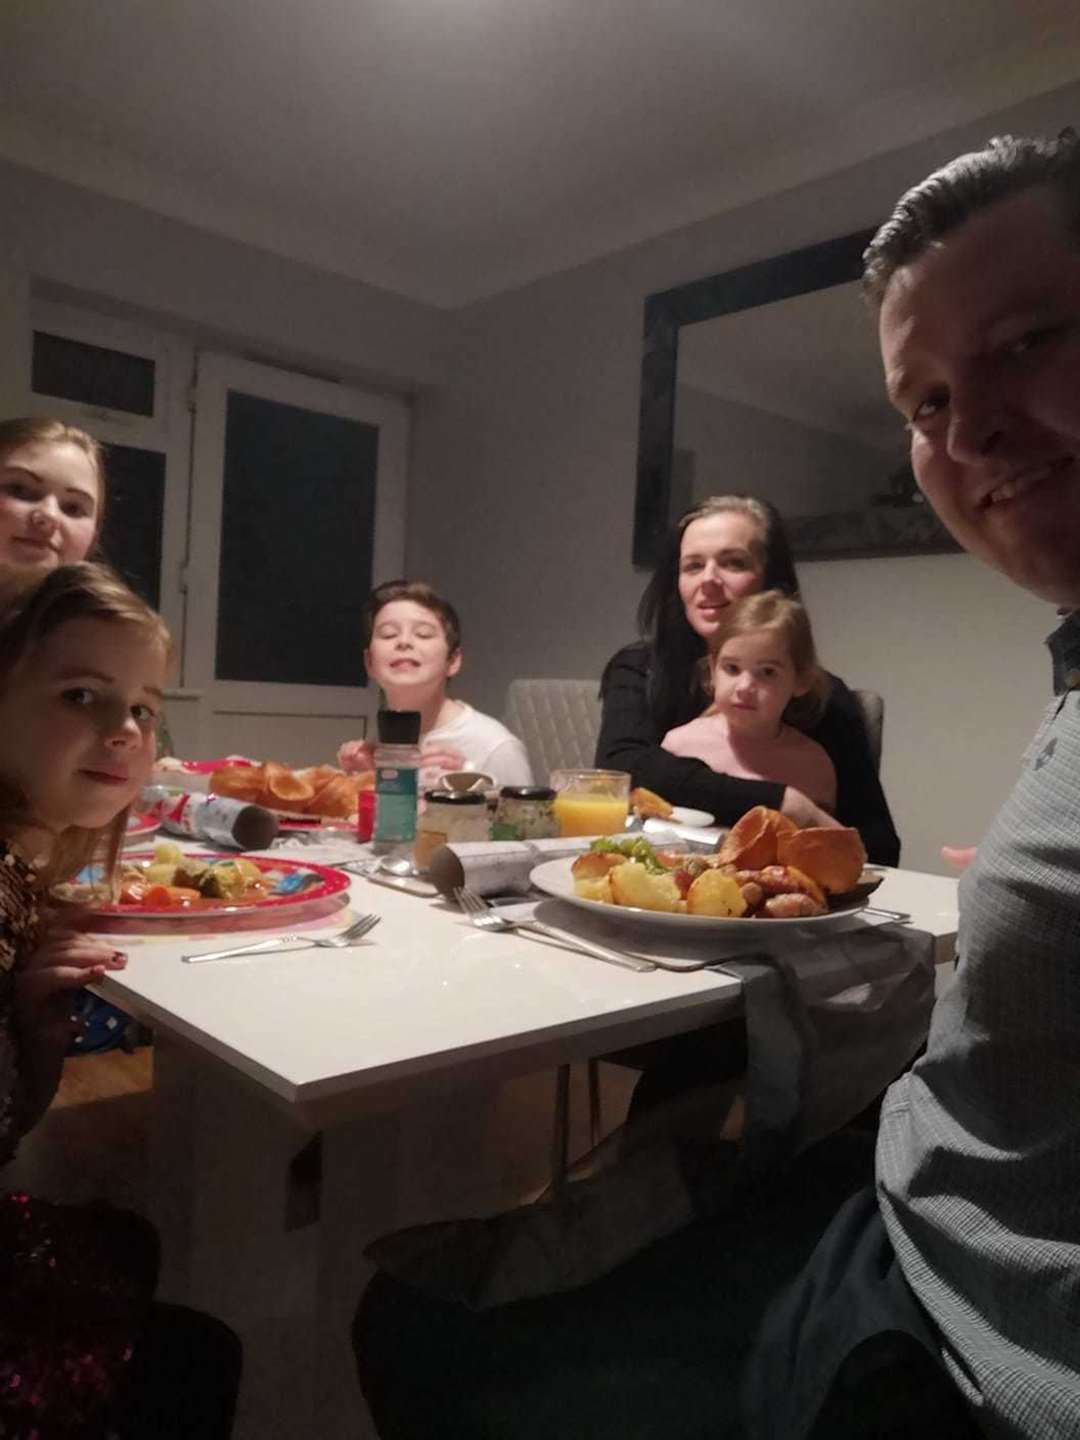 Karl and his family were able to resume their Christmas dinner after he came out of hospital